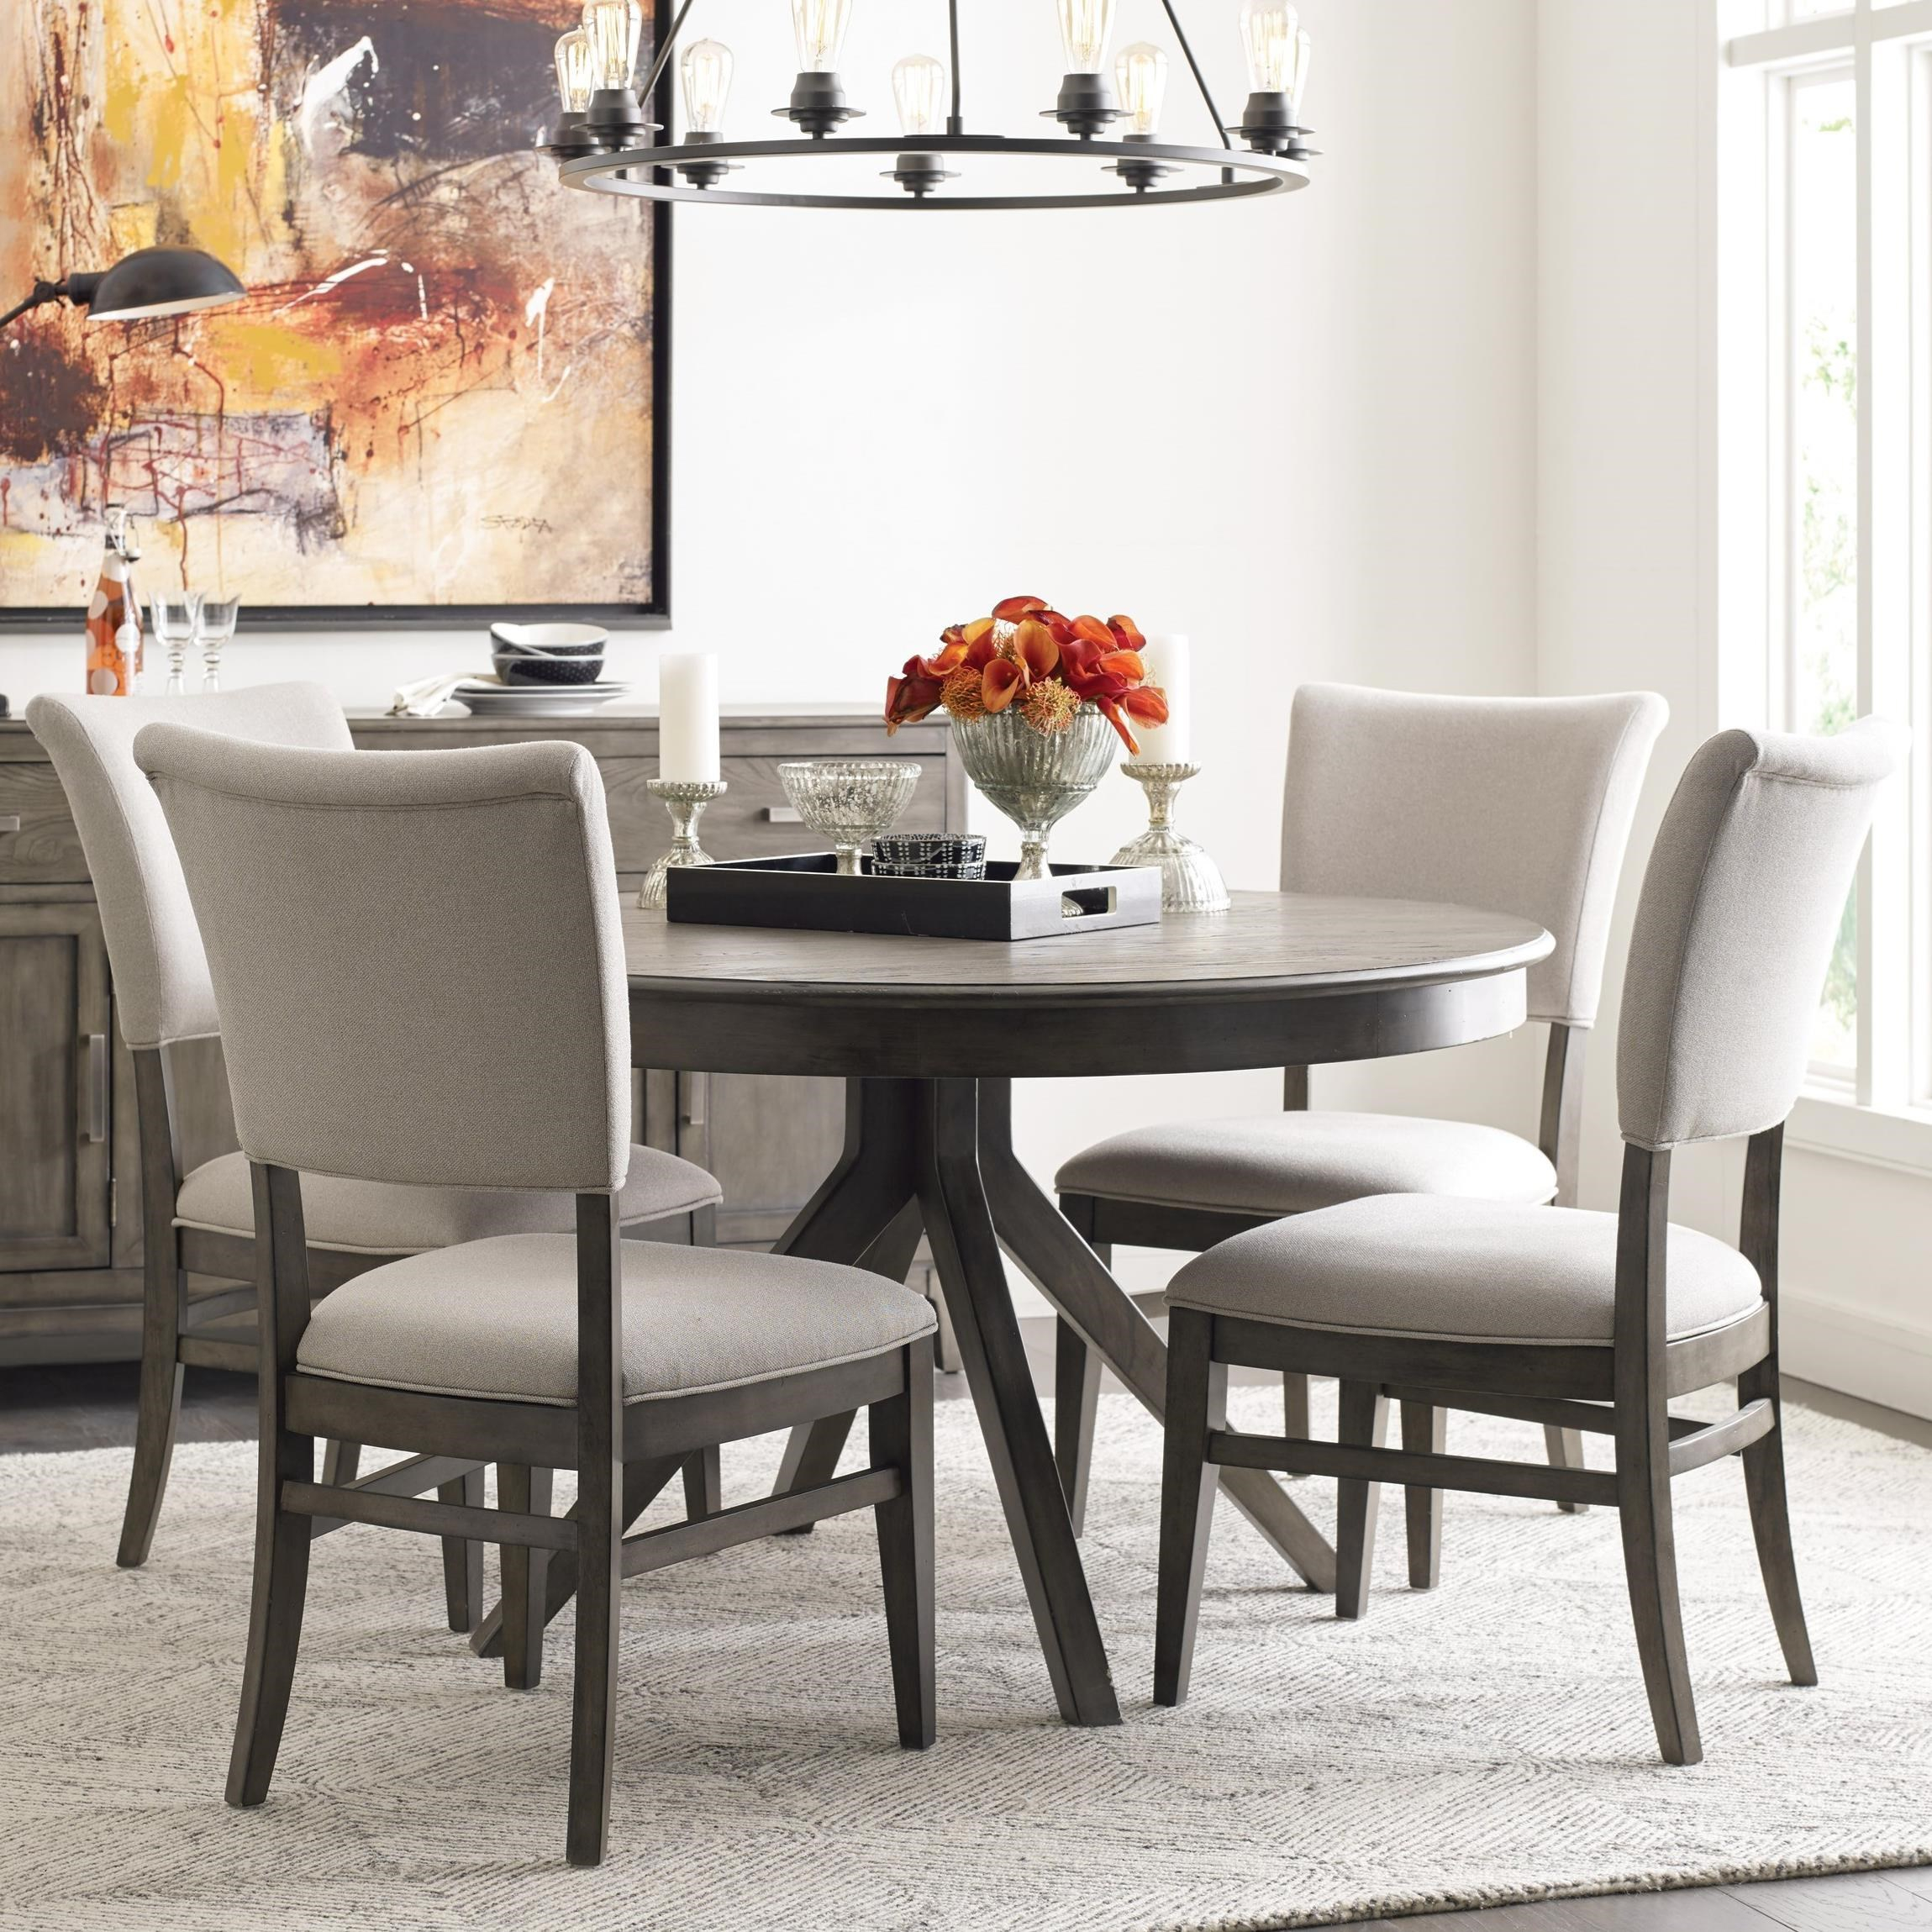 Kincaid Furniture Cascade Round Dining Table Set With 4 within sizing 2299 X 2299